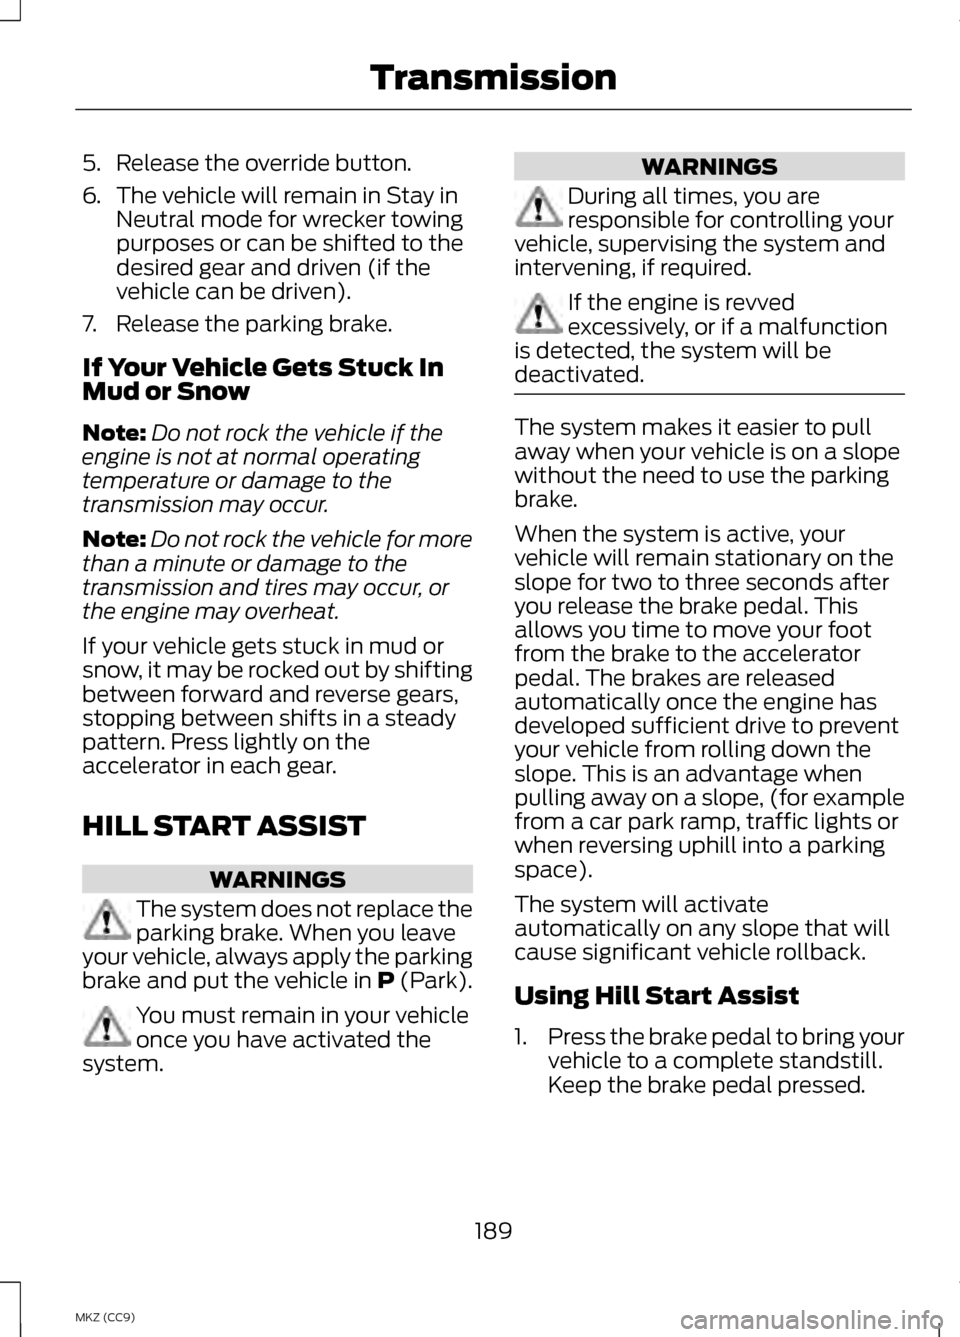 LINCOLN MKZ HYBRID 2013  Owners Manual 5. Release the override button.
6.
The vehicle will remain in Stay in
Neutral mode for wrecker towing
purposes or can be shifted to the
desired gear and driven (if the
vehicle can be driven).
7. Relea